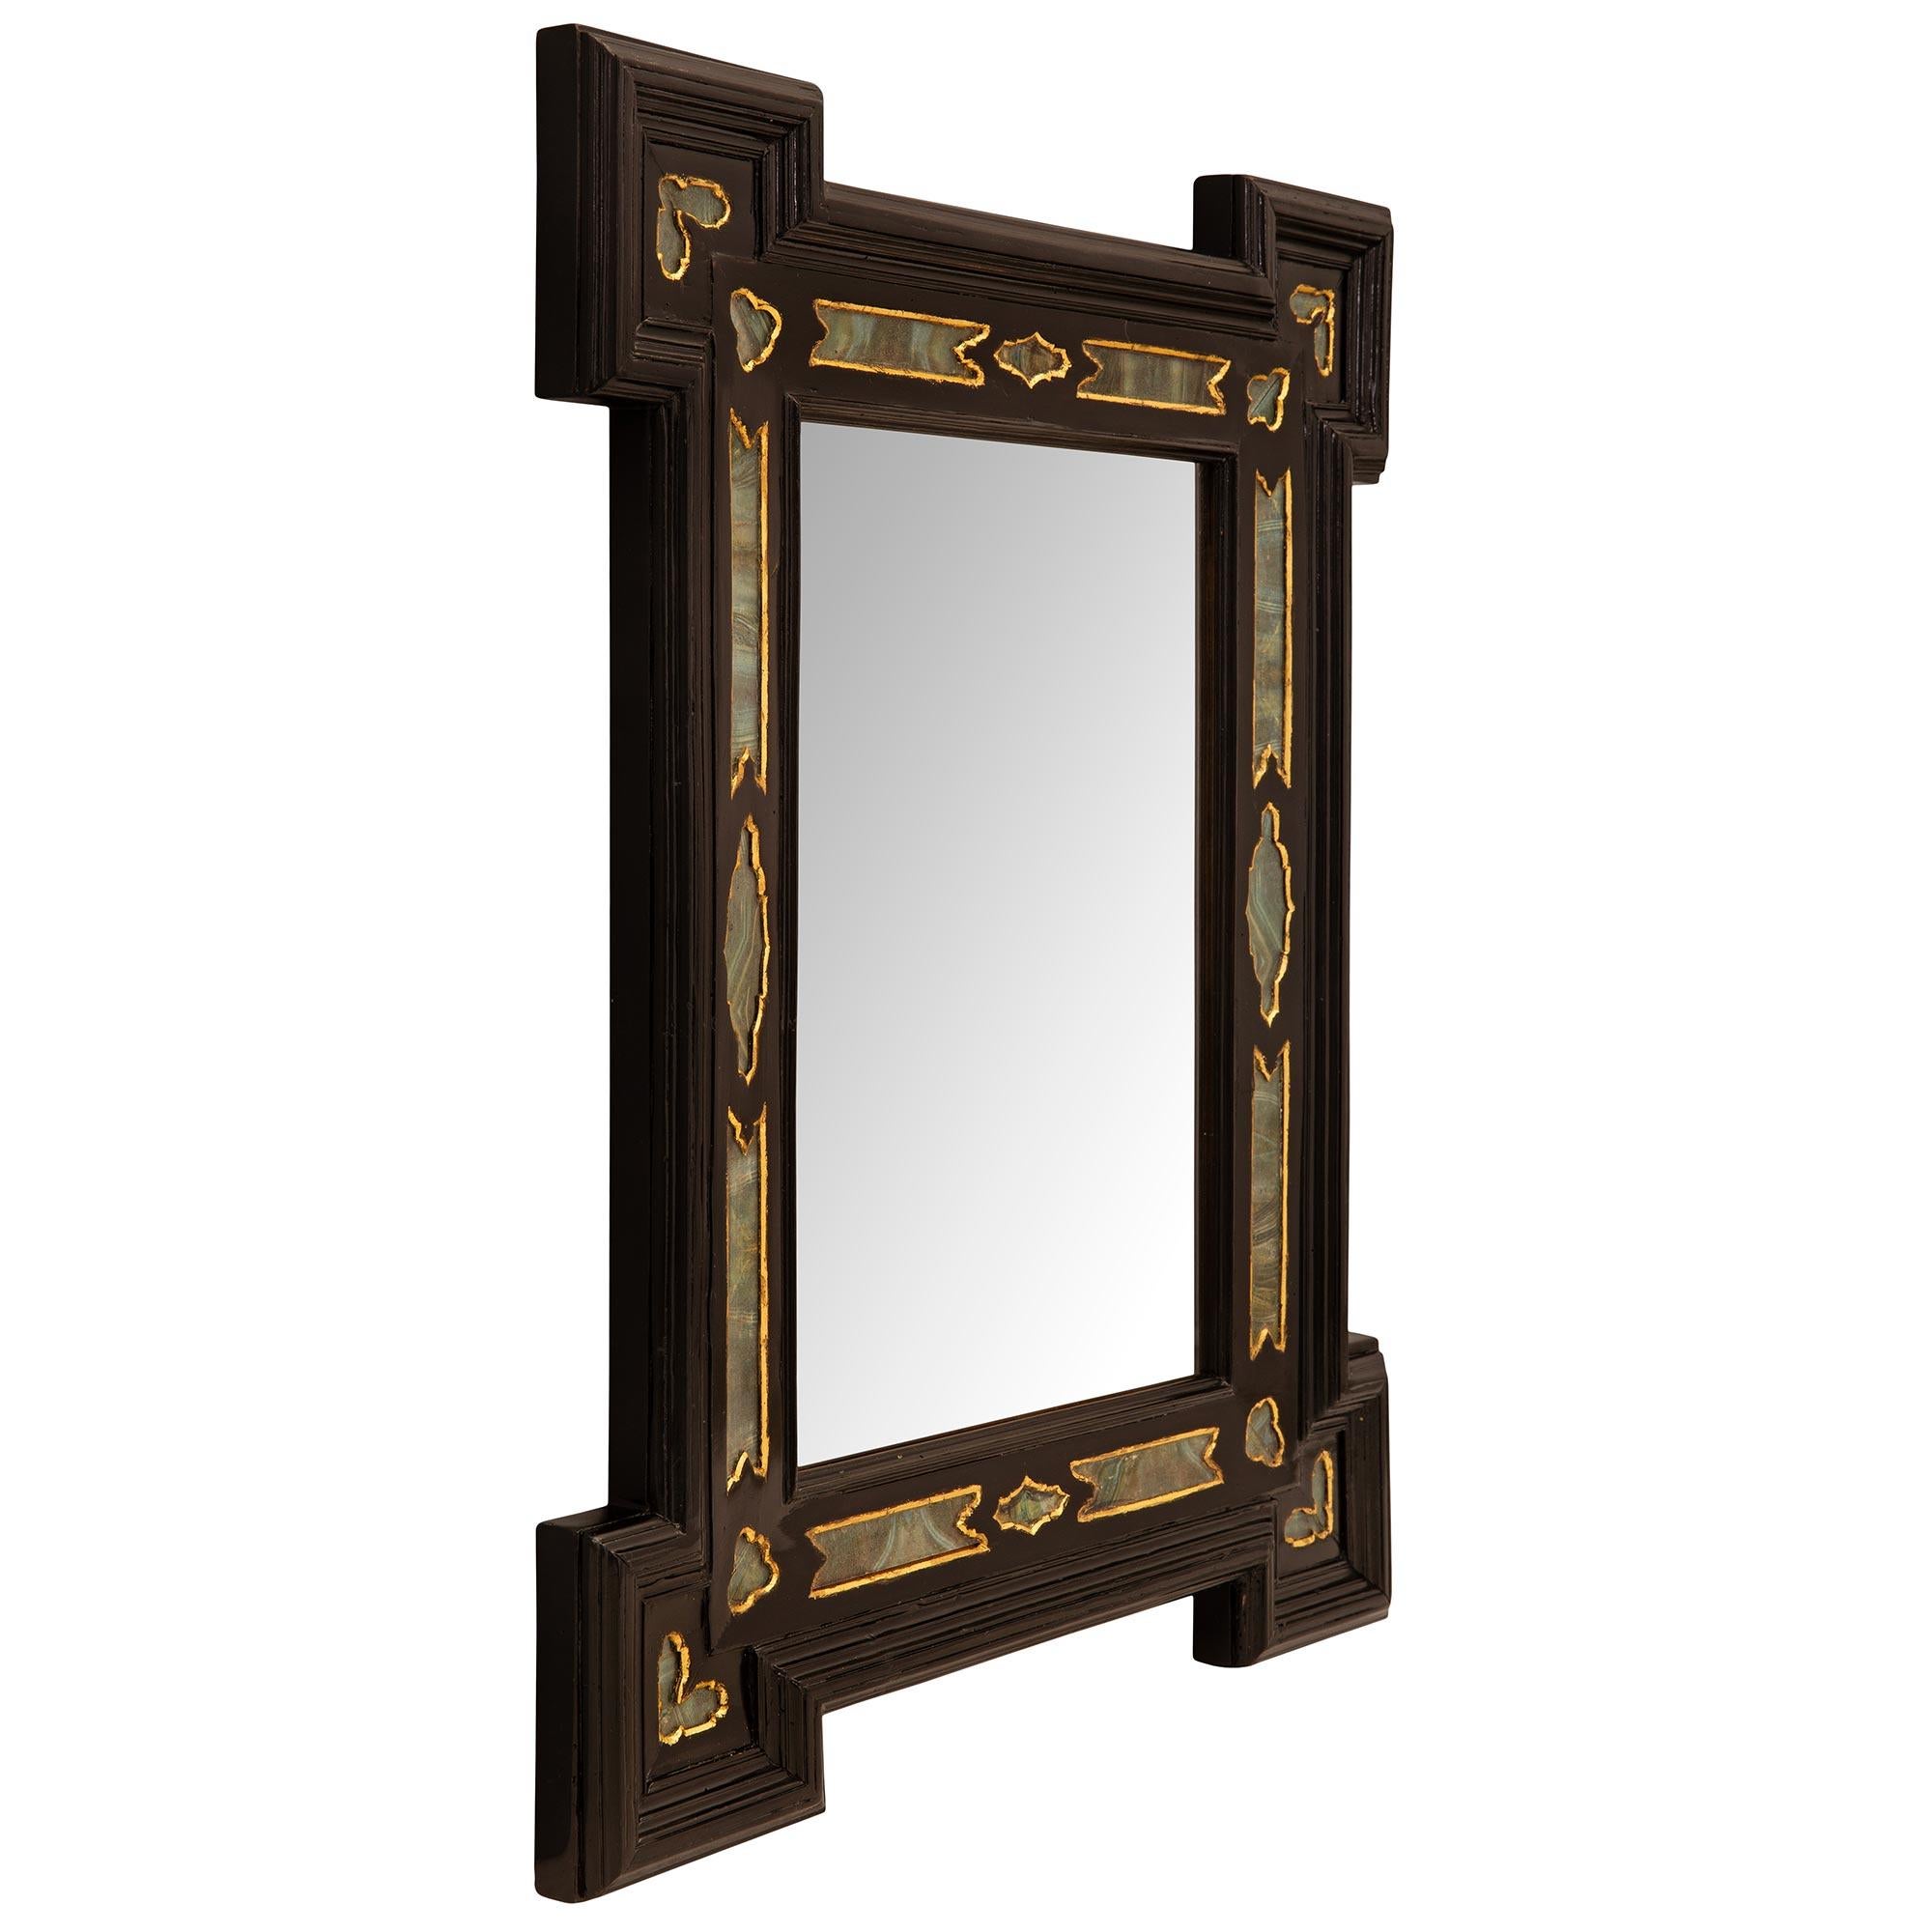 A beautiful and most decorative Italian early 19th century Baroque st. ebonized fruitwood and Verre Églomisé mirror. The mirror retains its original mirror plate set within a fine wrap around mottled border. The frame displays stunning wonderfully